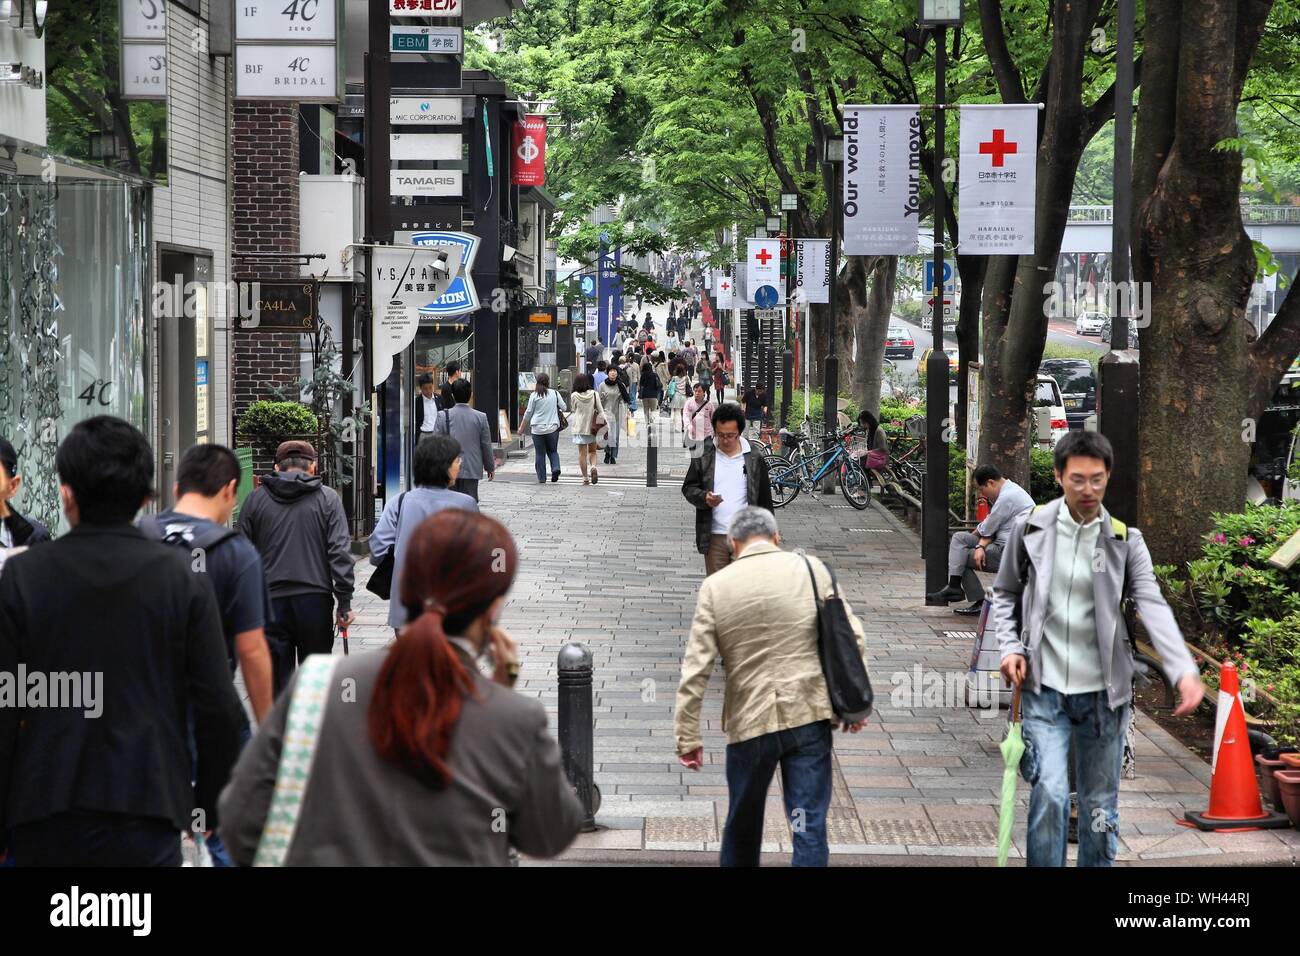 TOKYO, JAPAN - MAY 9, 2012: People shop in Omotesando district in Tokyo. Omote-sando is considered one of most important shopping areas in Tokyo, the Stock Photo